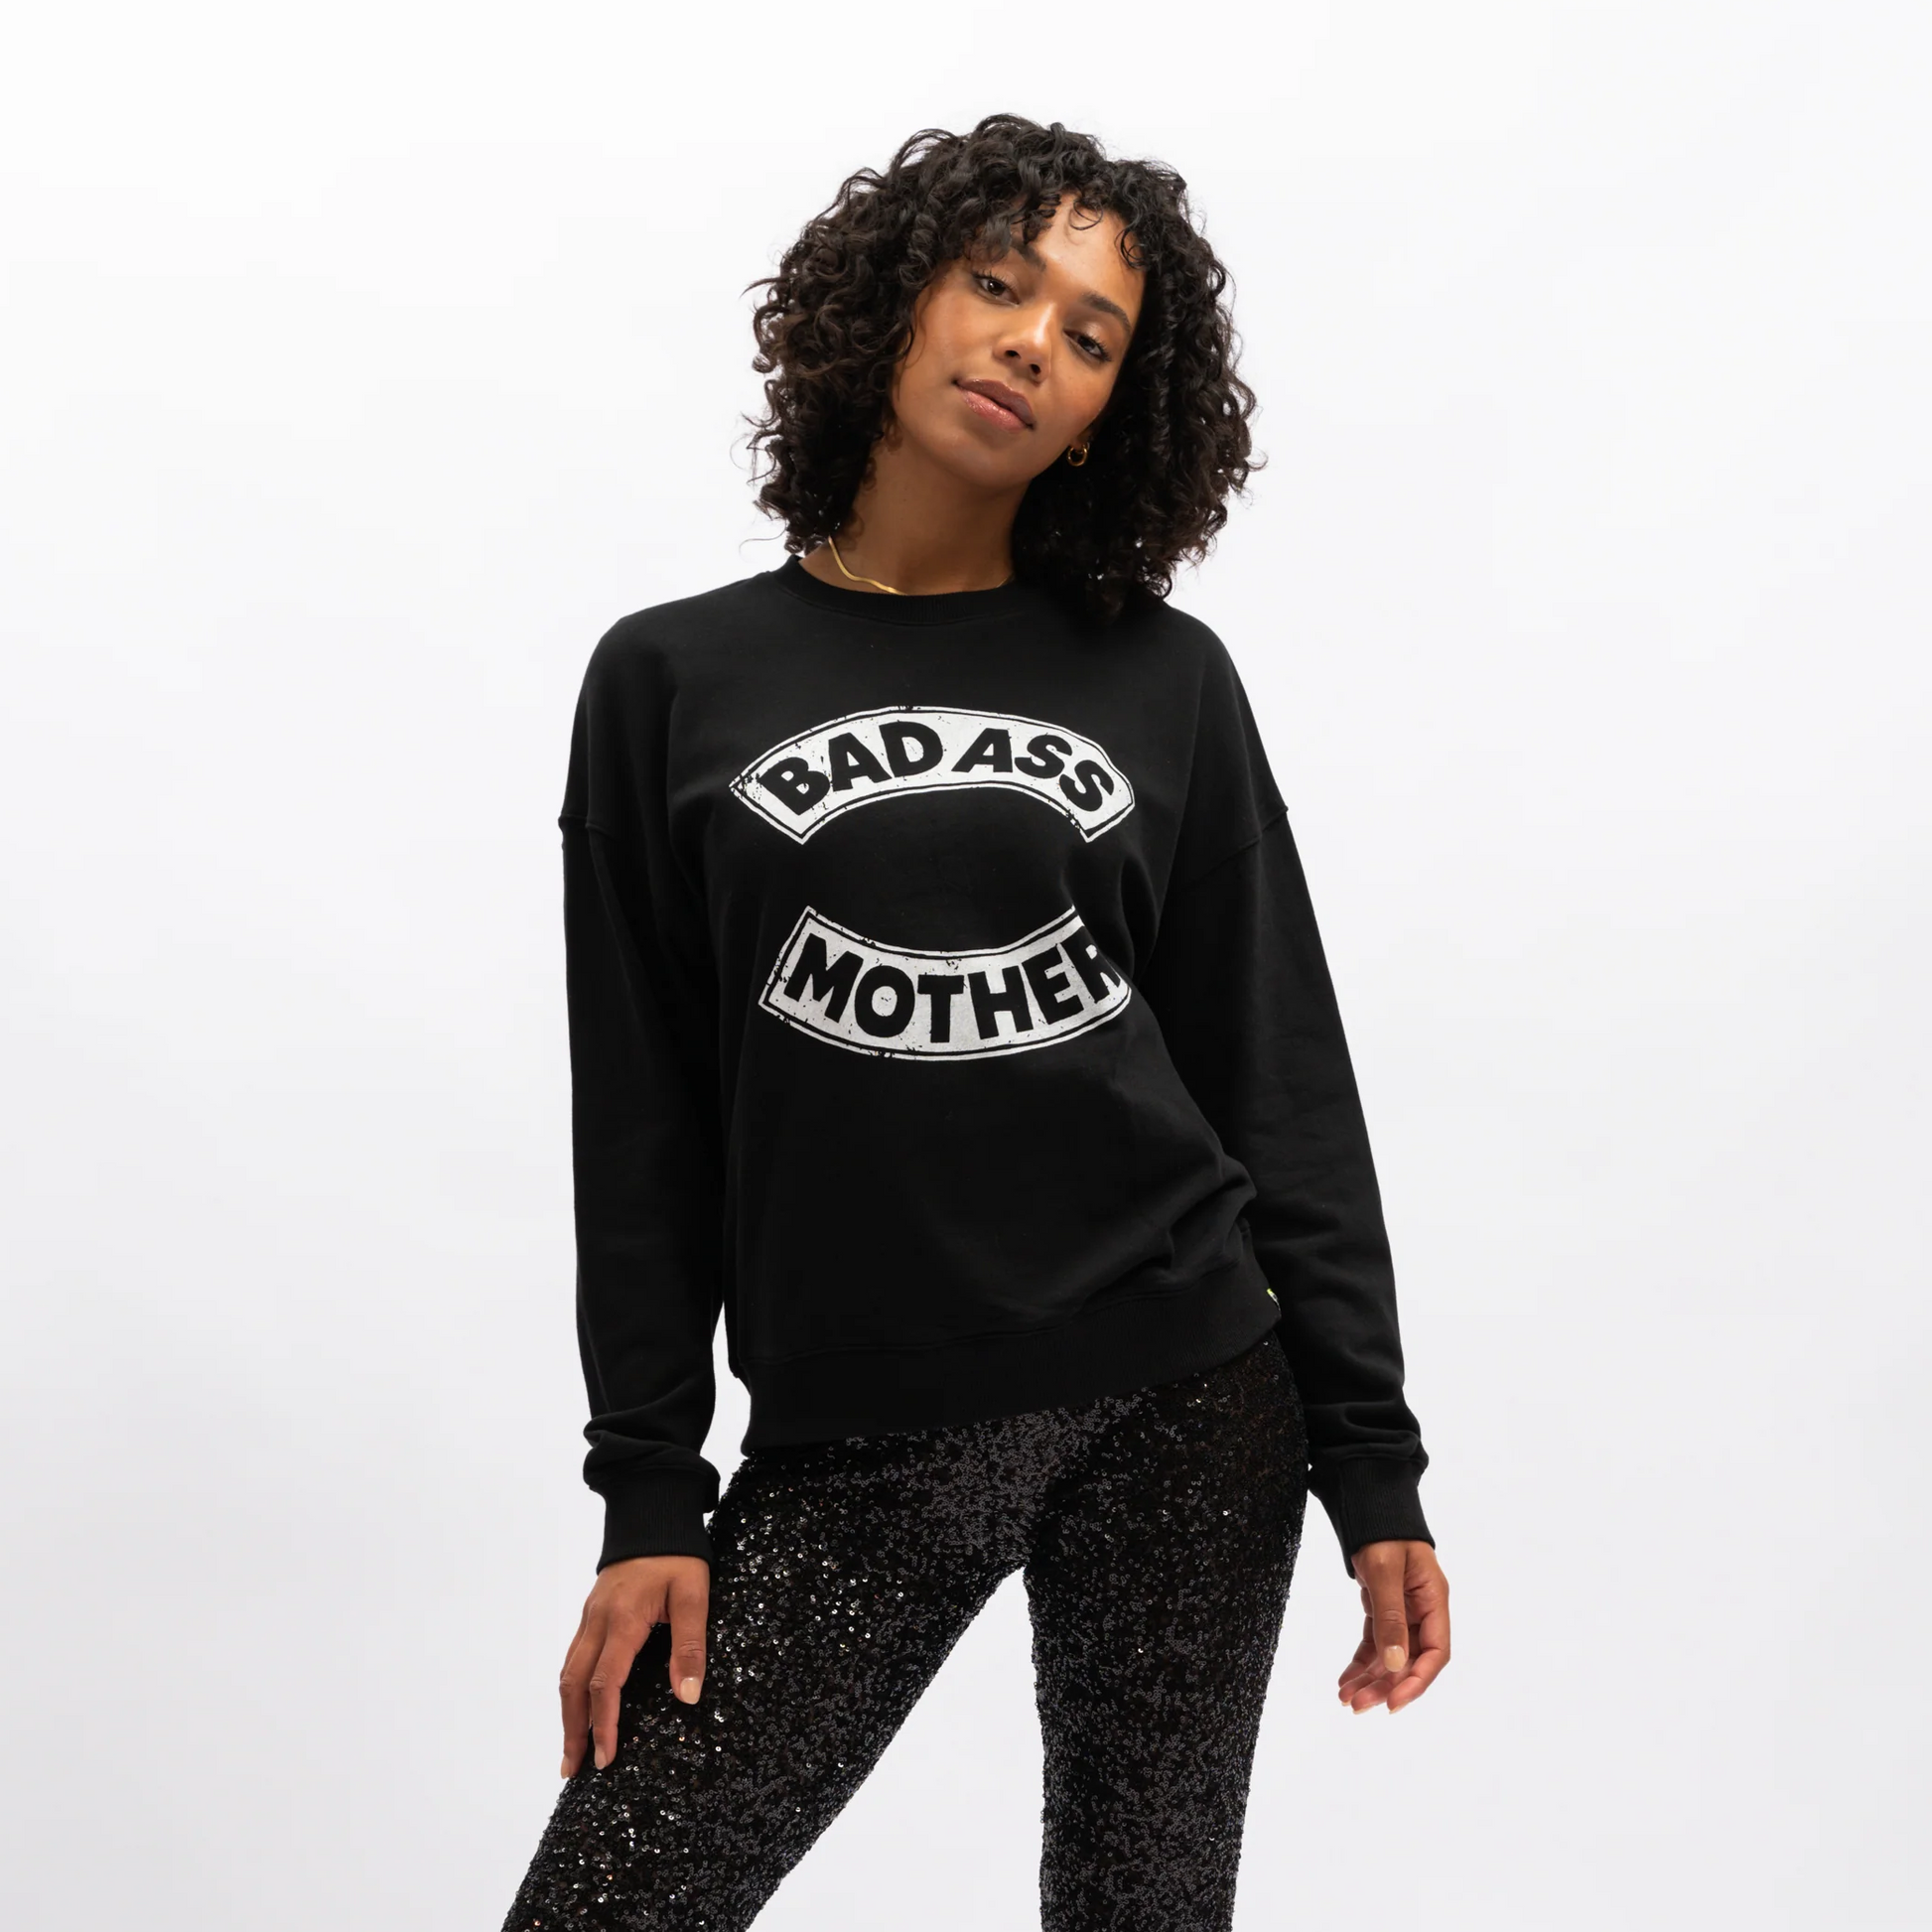 Elevate your everyday look with our black Chelsea Vintage Sweat by We Are The Others. Made from 100% cotton French Terry, this piece exudes a cool, effortless vibe. Featuring a bad ass mother graphic print on the front, this long-sleeved black colourway also boasts rib detail at the neck, cuff and hem opening for added texture. Enjoy the boxy shape for an easy-to-wear fit. lemon cyprus boutique